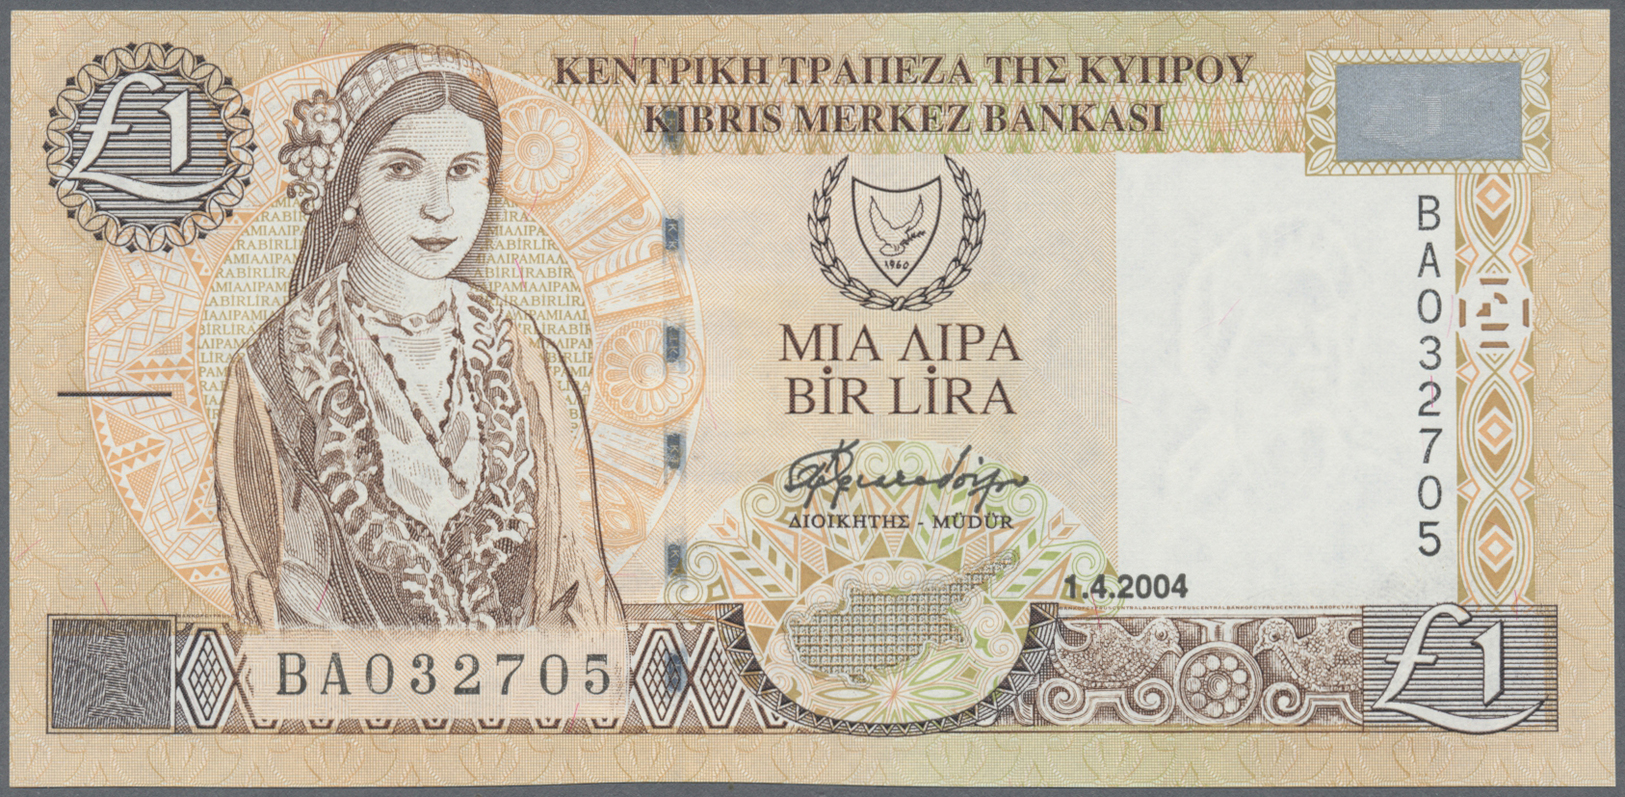 03543 Cyprus / Zypern: set of 4 notes containing 1 Pound 2004 (2x), 5 Pounds 2003 and 10 Pounds 2005, in condition: UNC.